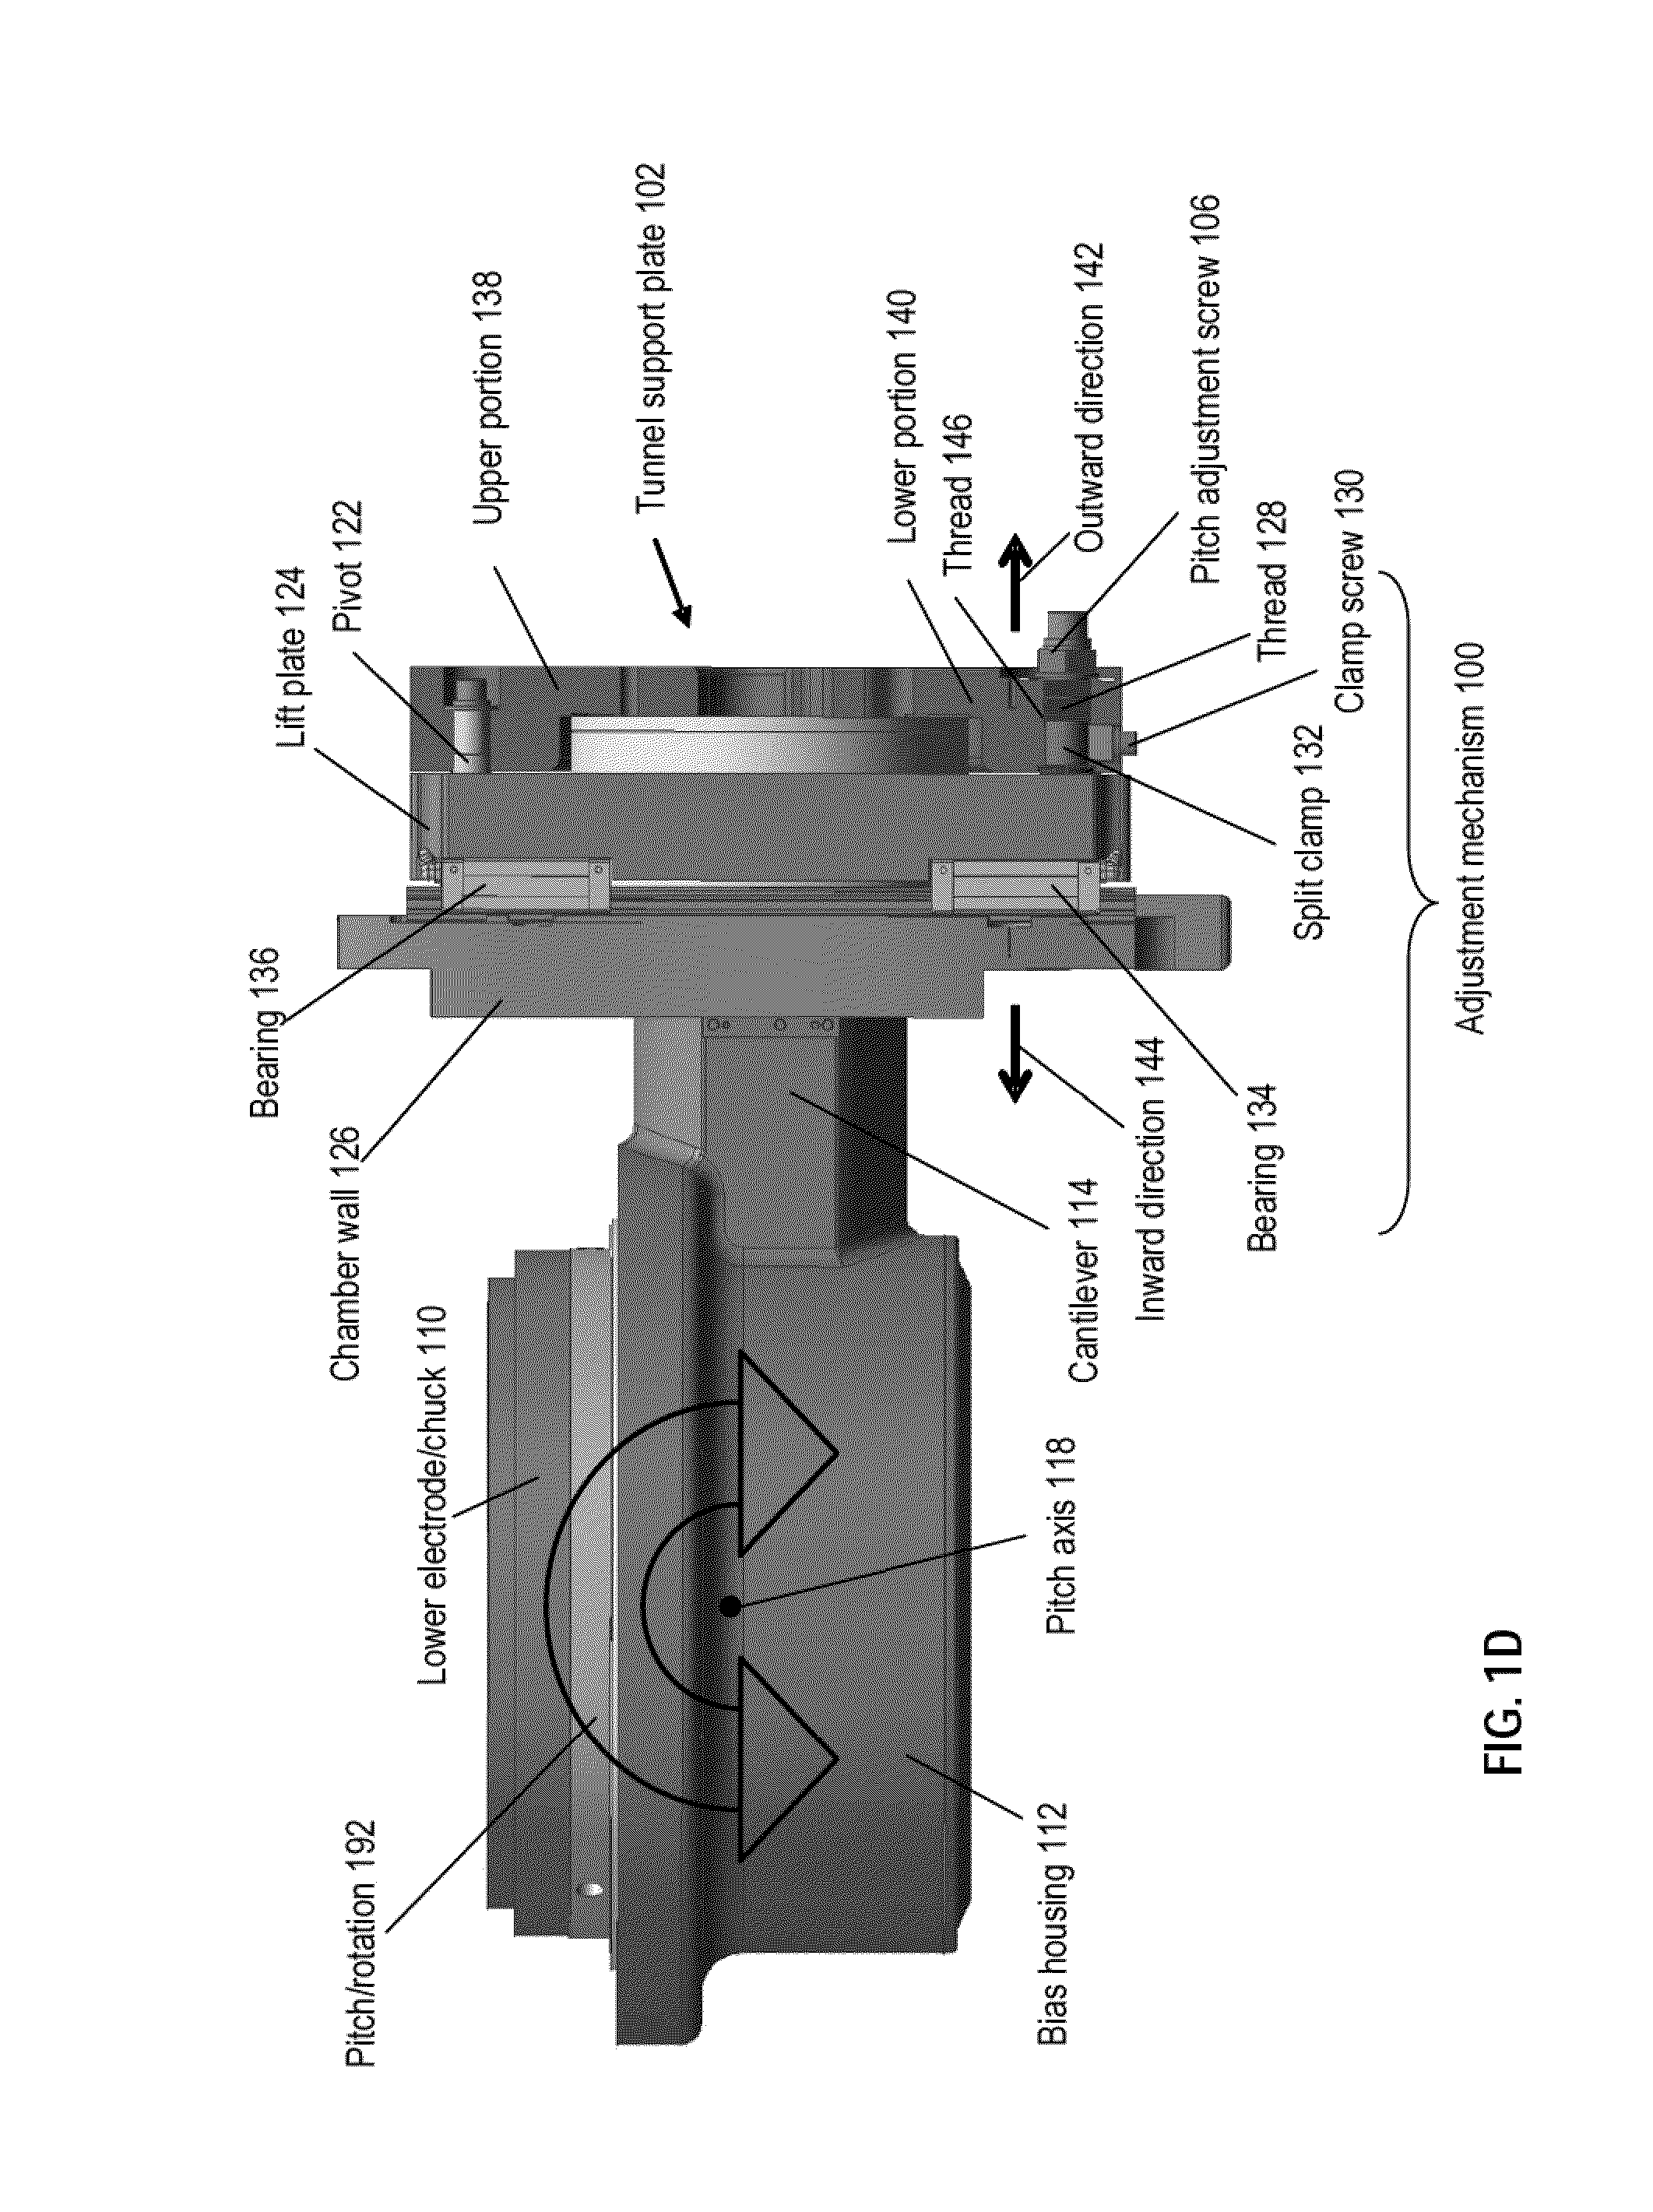 Plasma processing systems with mechanisms for controlling temperatures of components